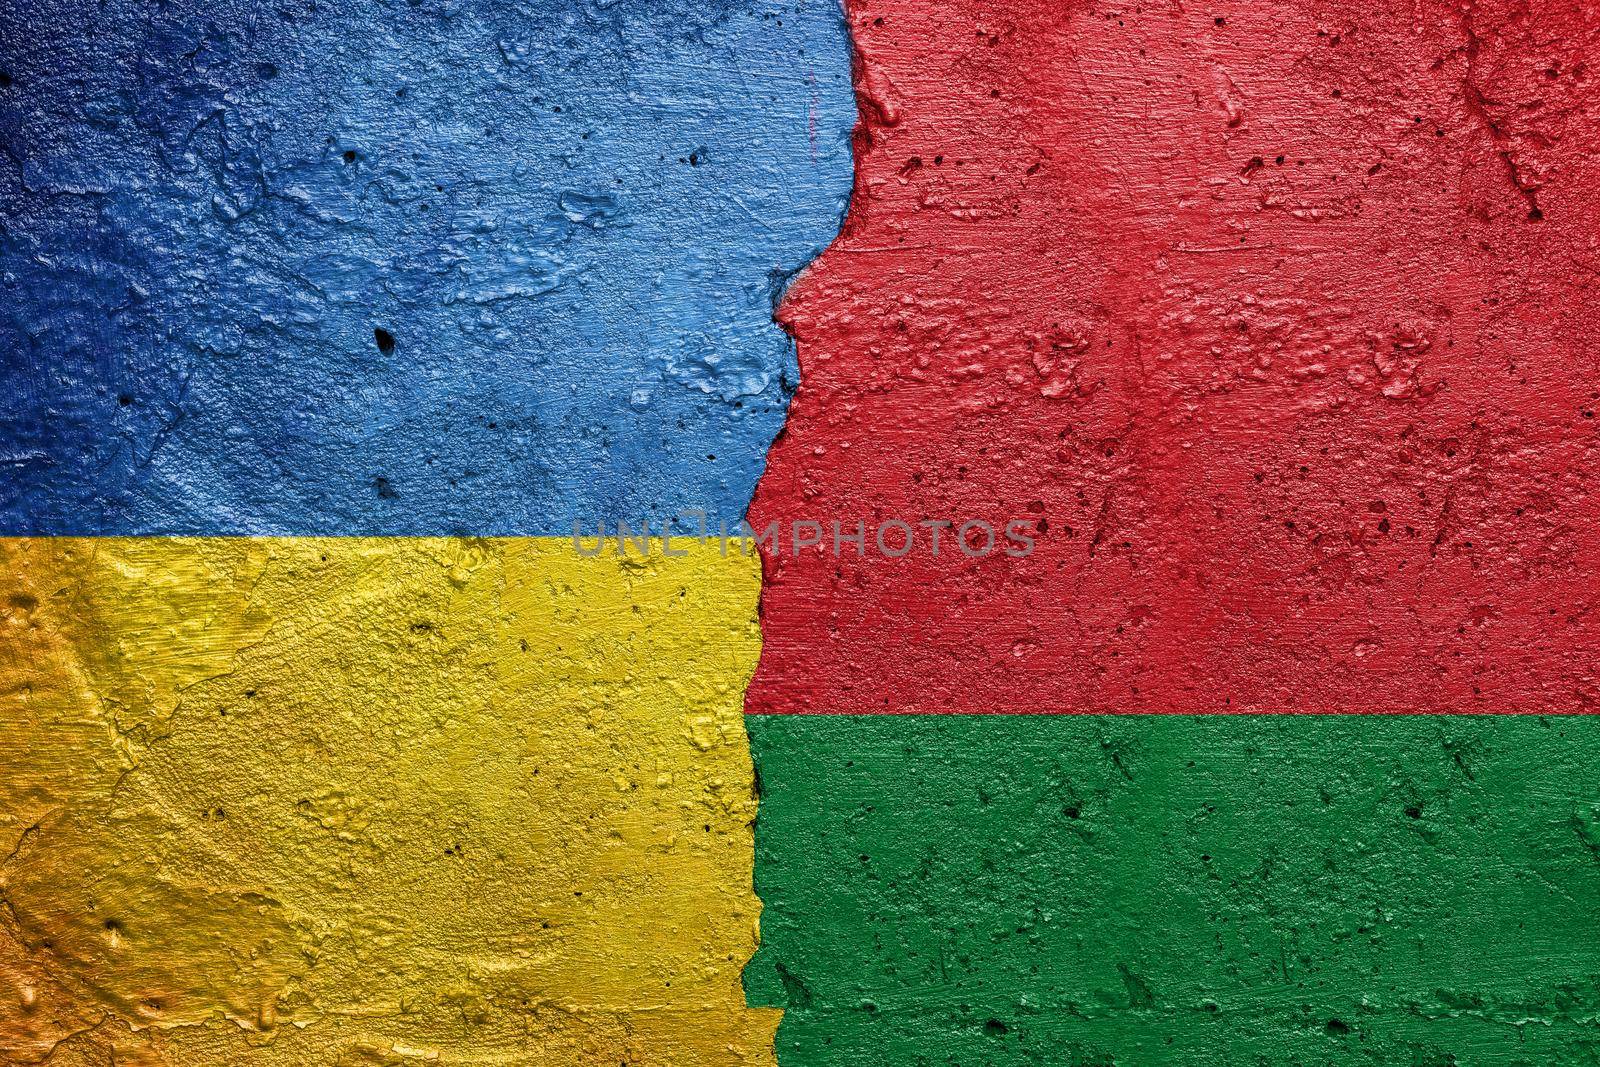 Ukraine and Belarus - Cracked concrete wall painted with a Ukrainian flag on the left and a Belarusian flag on the right stock photo by adamr